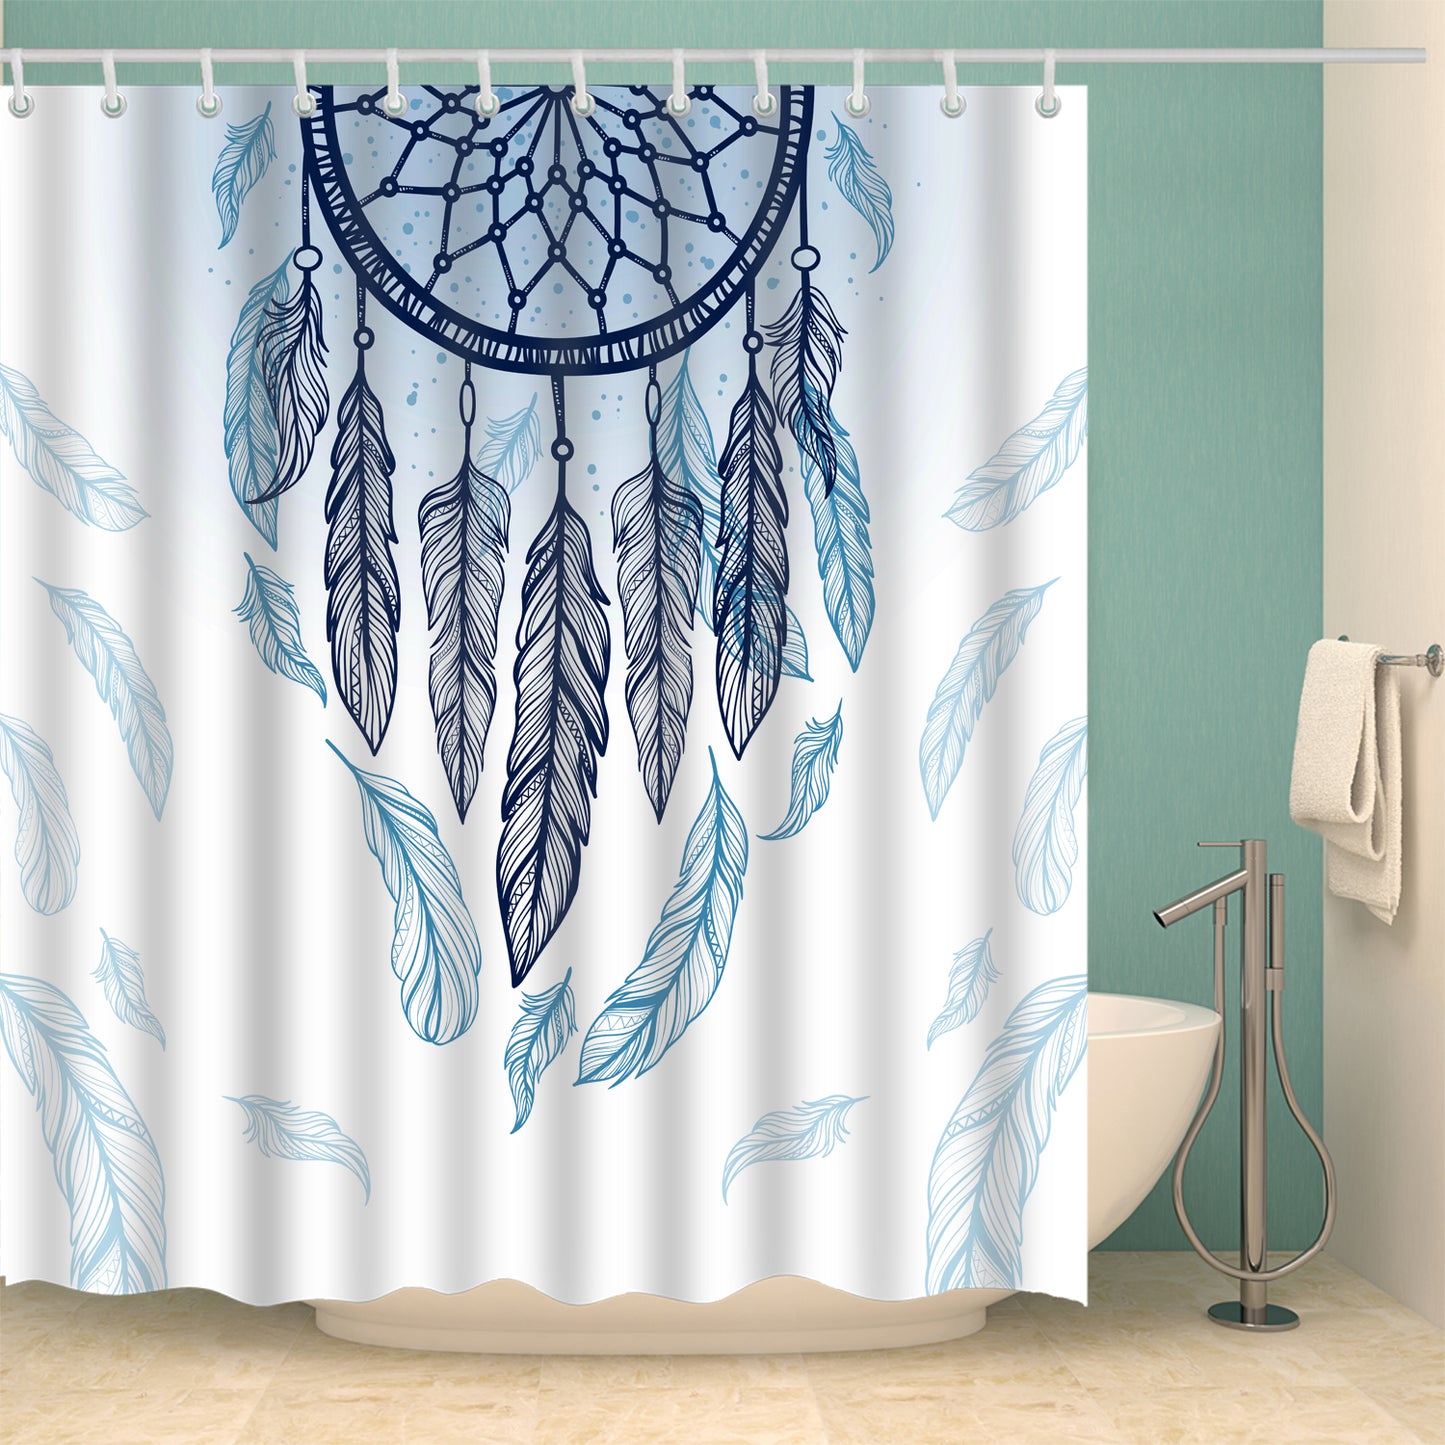 Ethnic Style Dream Catcher With Feathers Shower Curtain